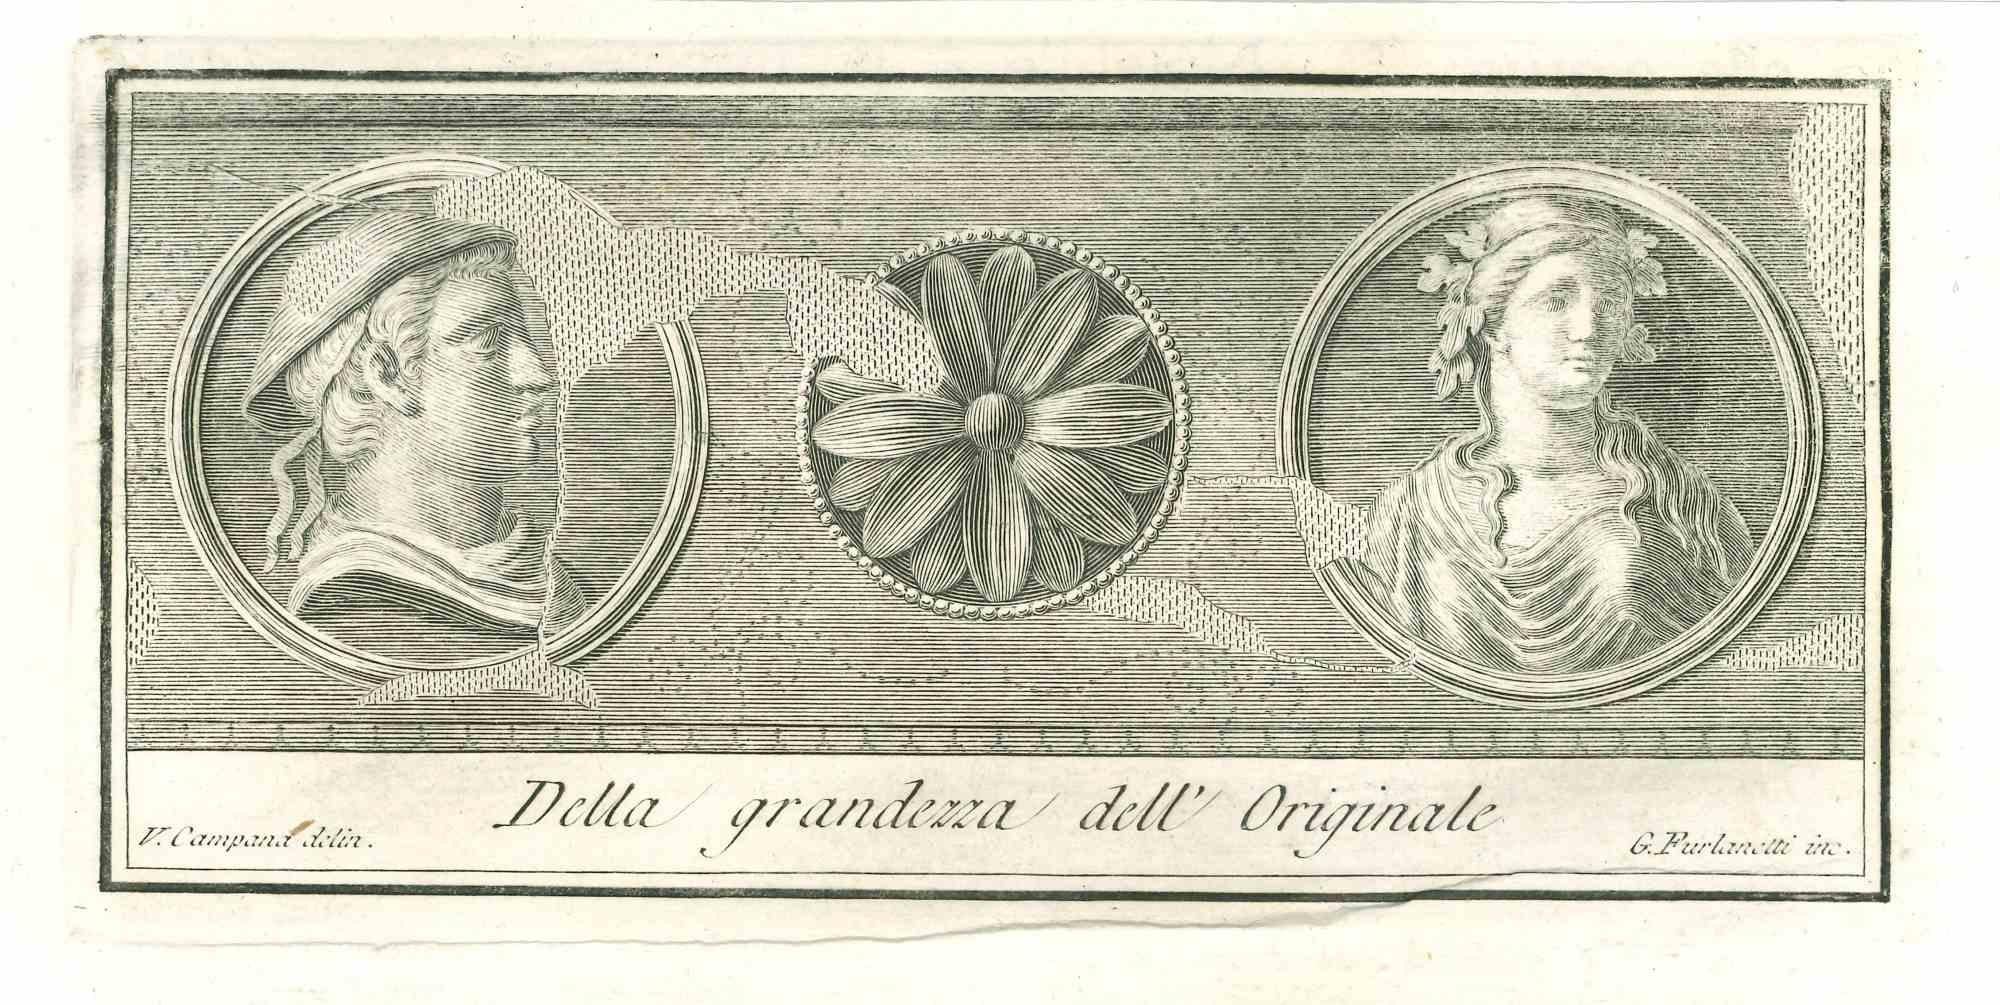 Ancient Roman Fresco, from the series "Antiquities of Herculaneum", is an original etching on paper realized by G.Furlanetti in the 18th century.

Signed on the plate on the lower right

Good conditions.

The etching belongs to the print suite